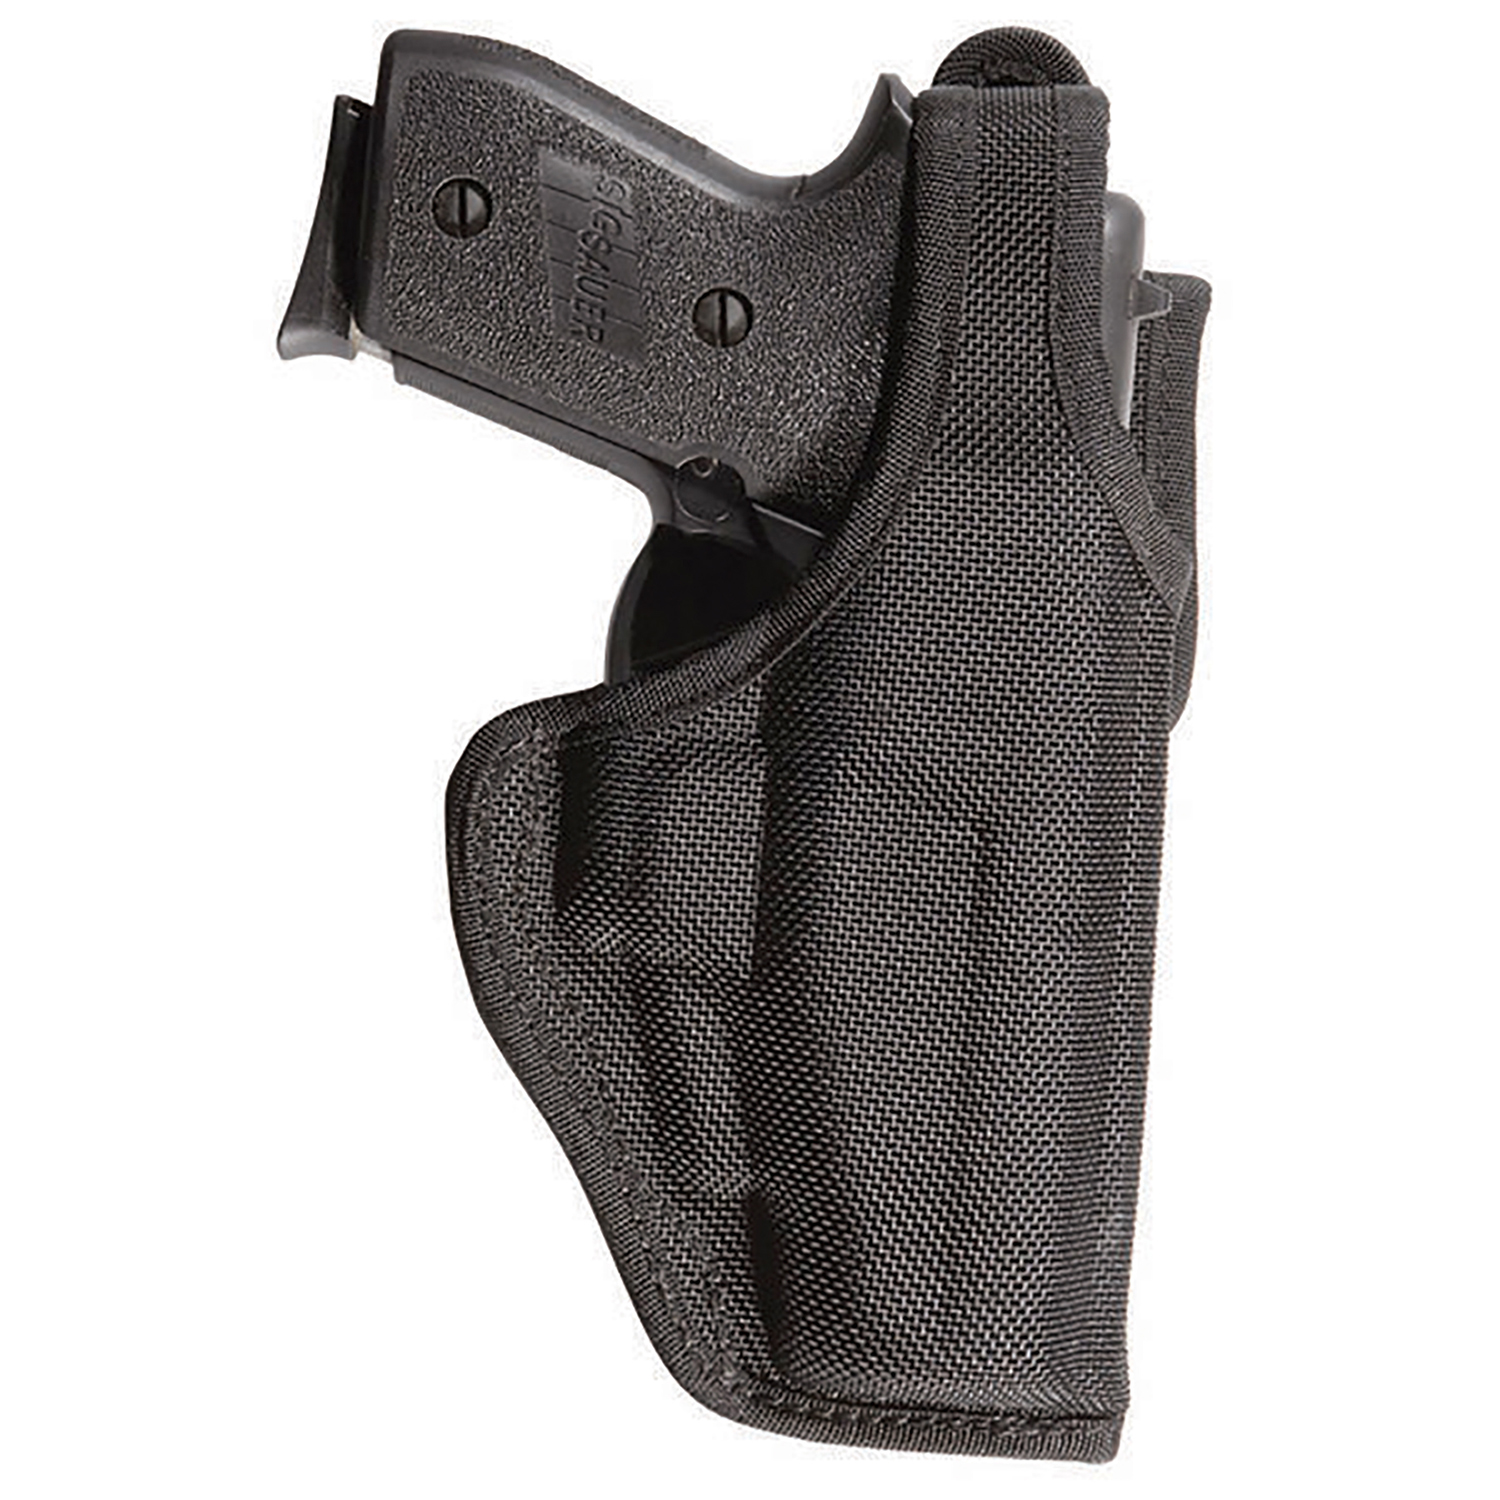 Bianchi Model 7120 Defender Mid-Ride Duty Holster with Jacke